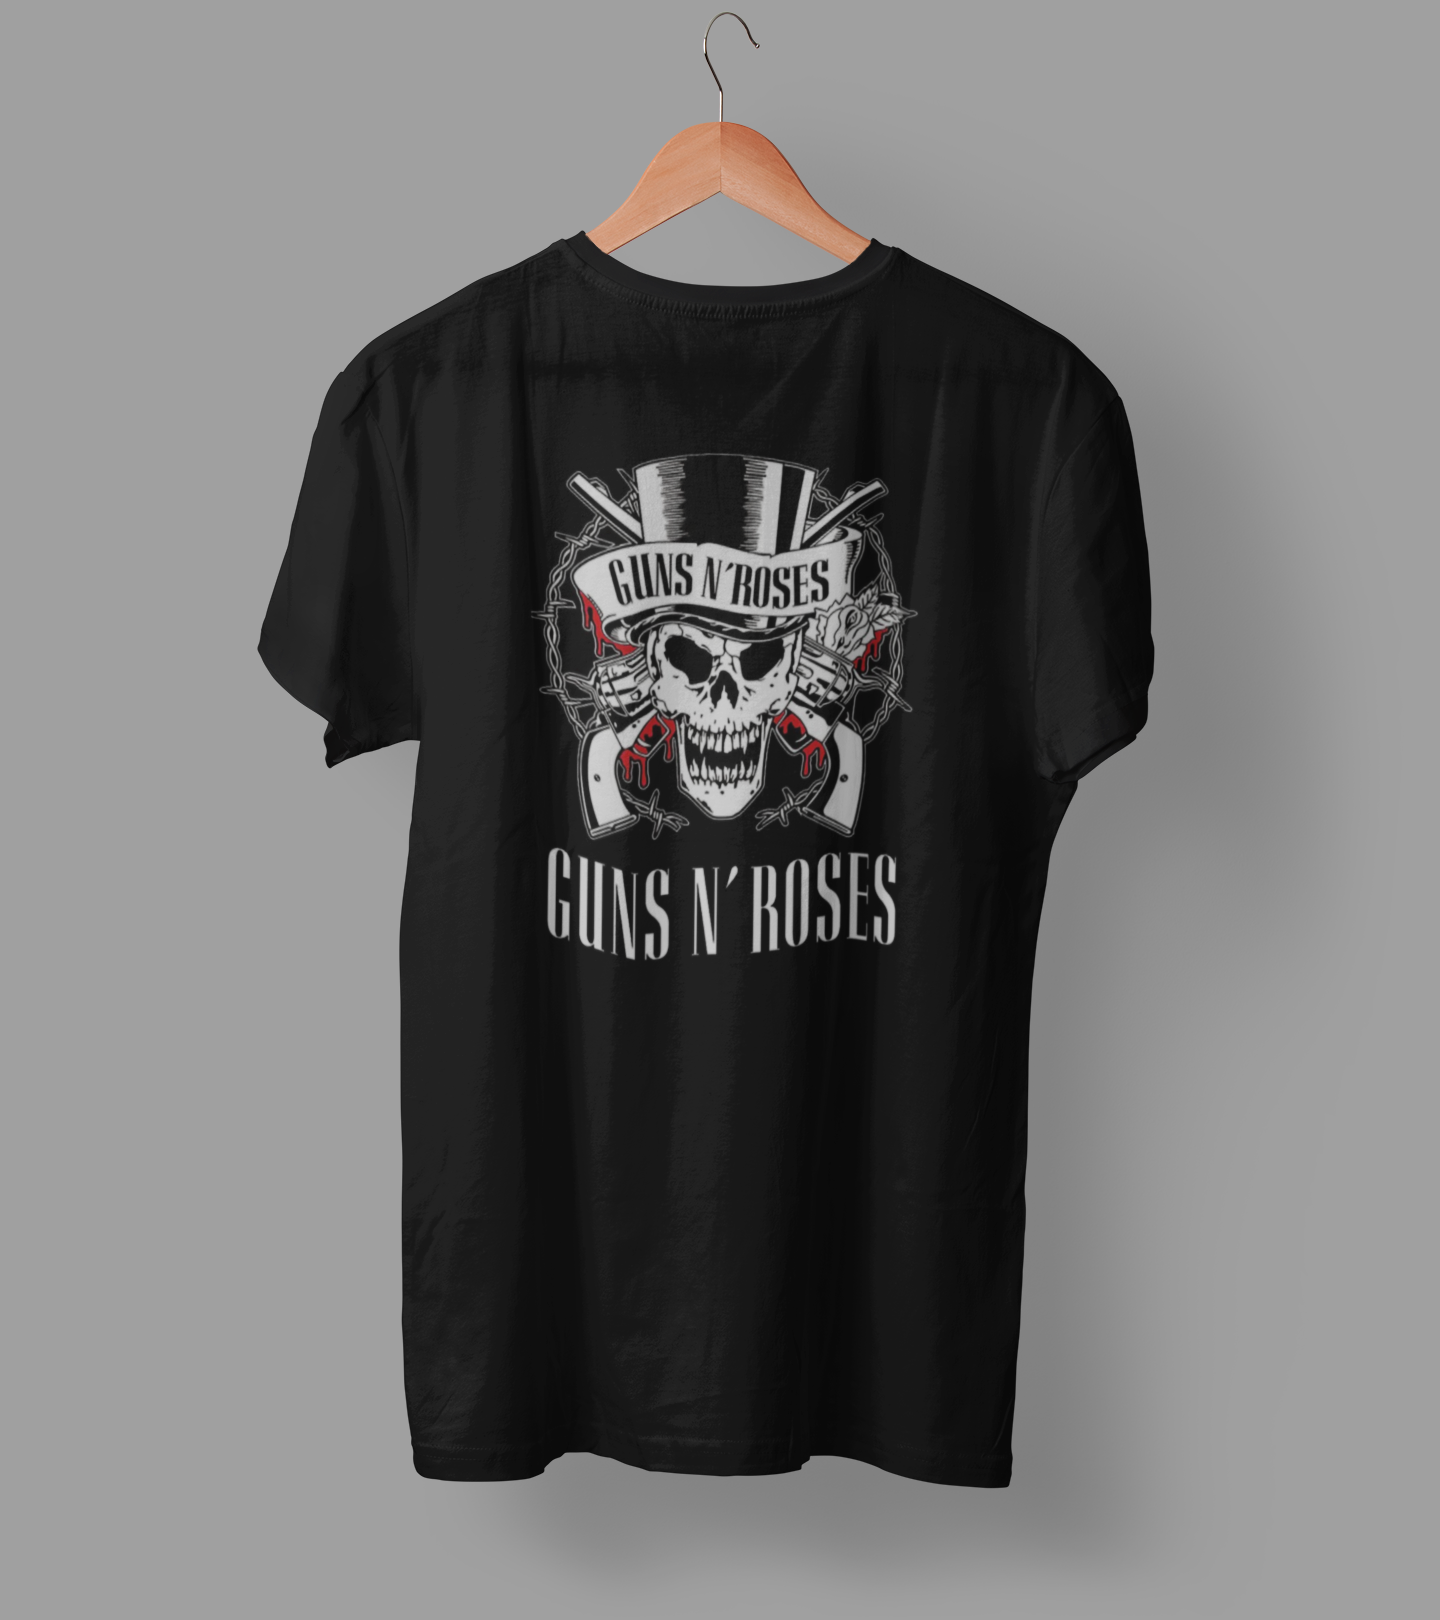 Guns & Roses (Double Sided Print): Music & Bands- Half Sleeve T-Shirts